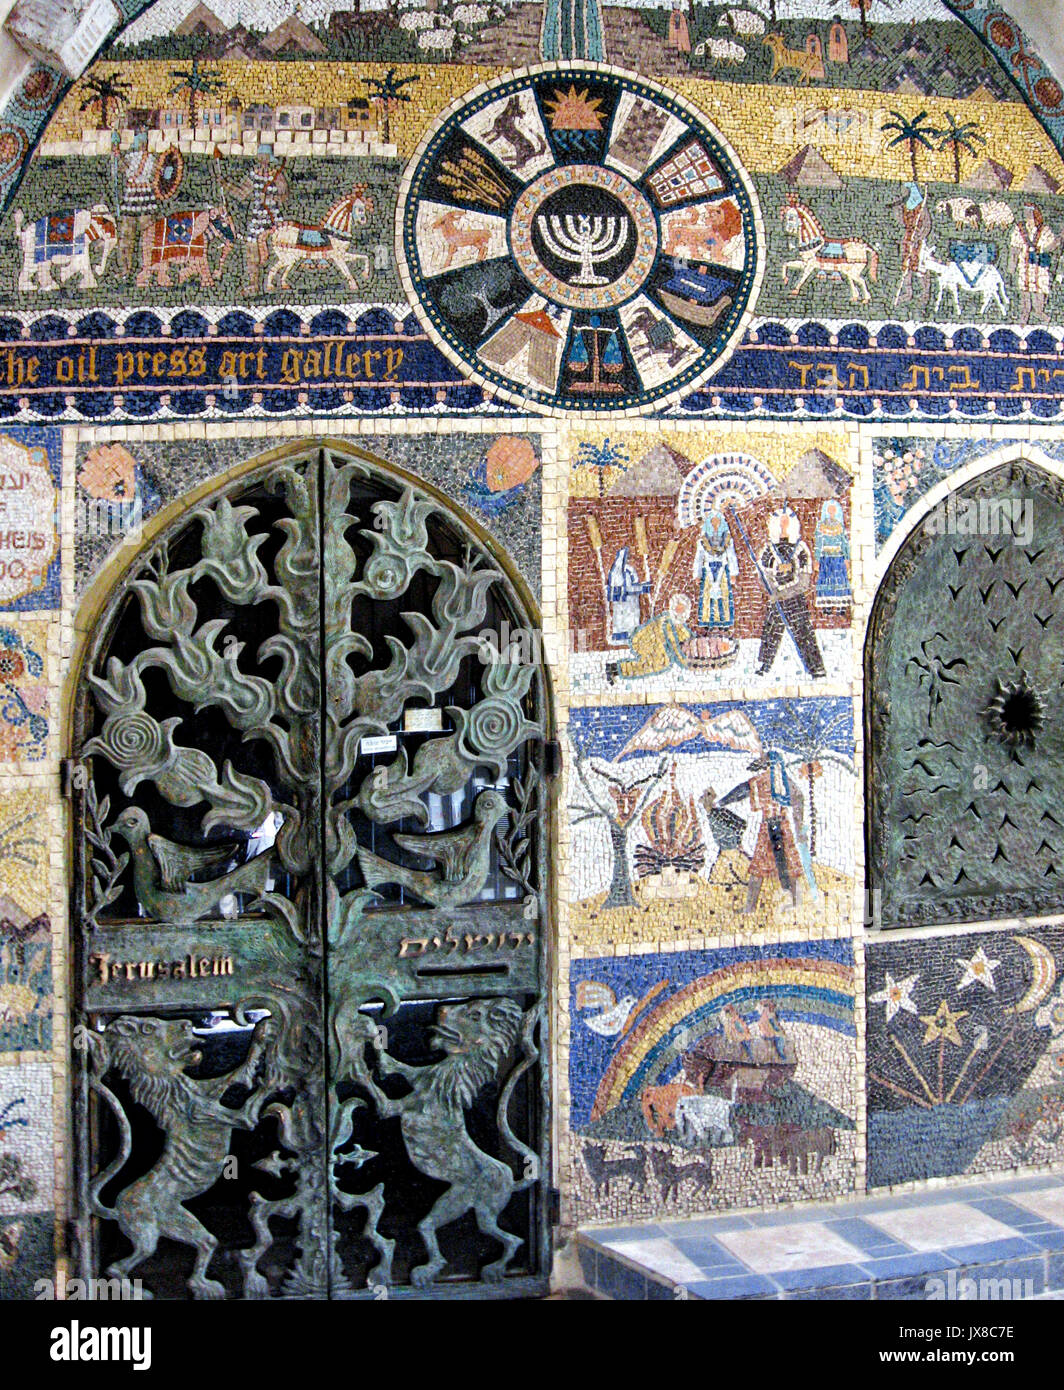 The colorful mosaic door of the Oil Press Art Gallery in the Jewish Quarter in Jerusalem's Old City. Stock Photo